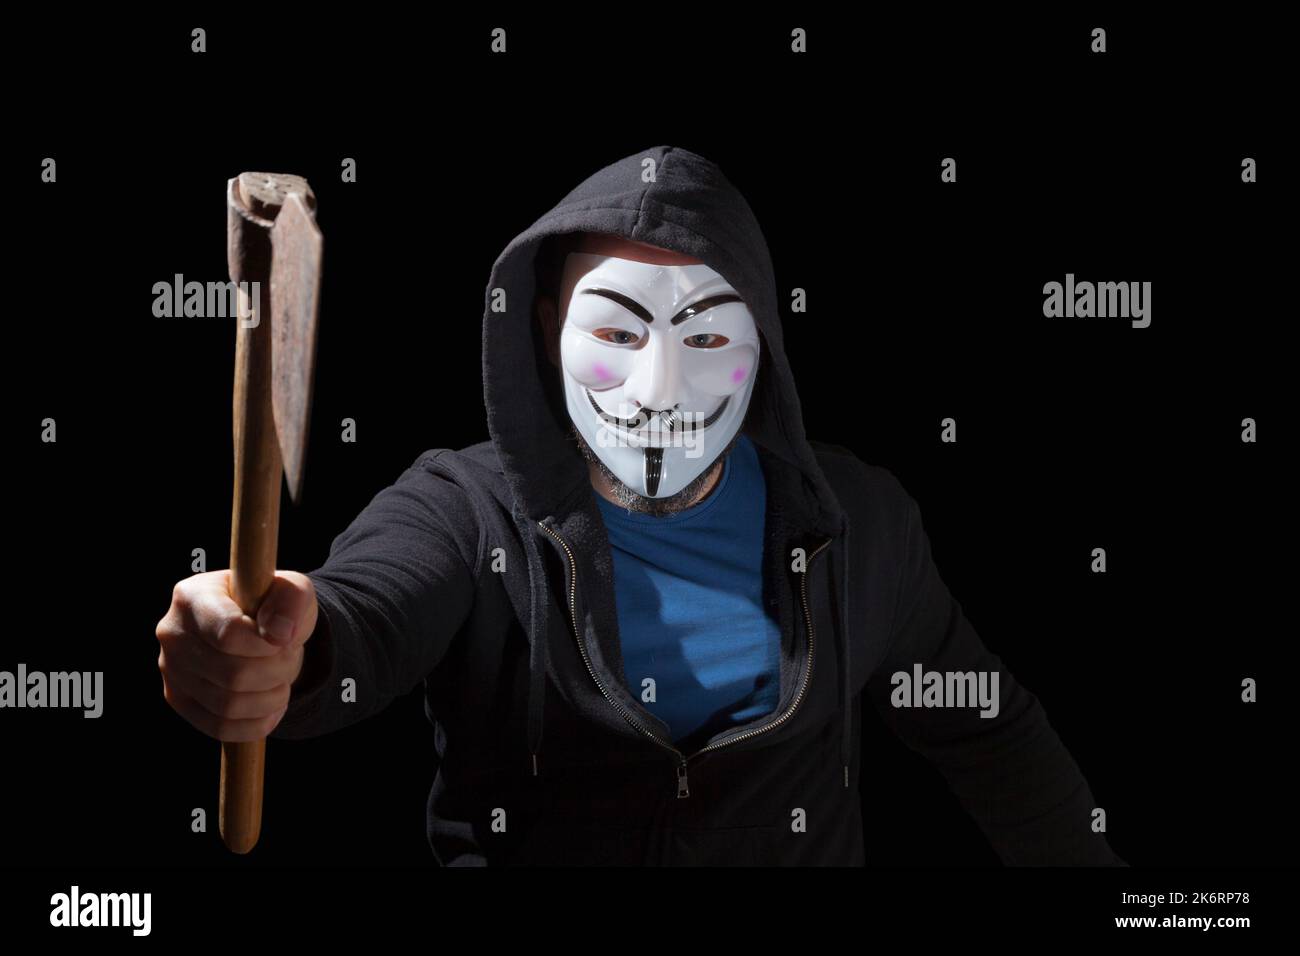 Man wearing a mask and a hoodie brandishing a armed a hatchet on black background. Stock Photo